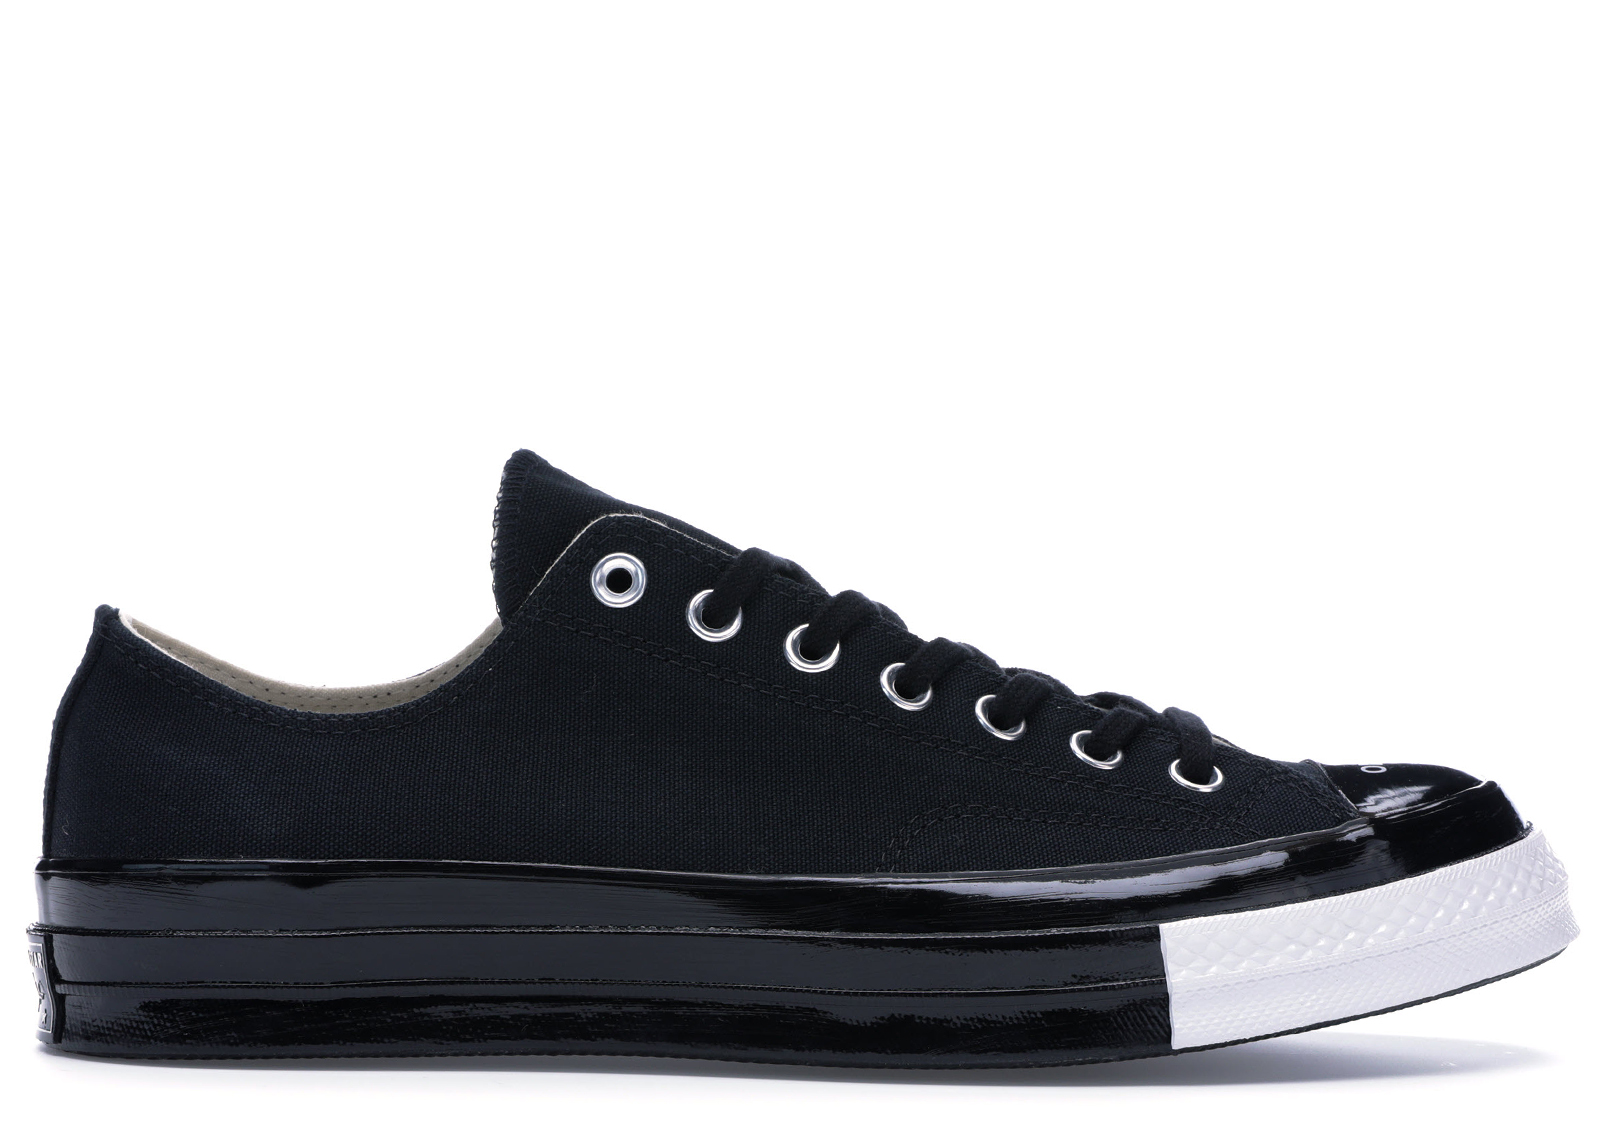 Converse Chuck Taylor All-Star 70 Ox Undercover Black - 163010C